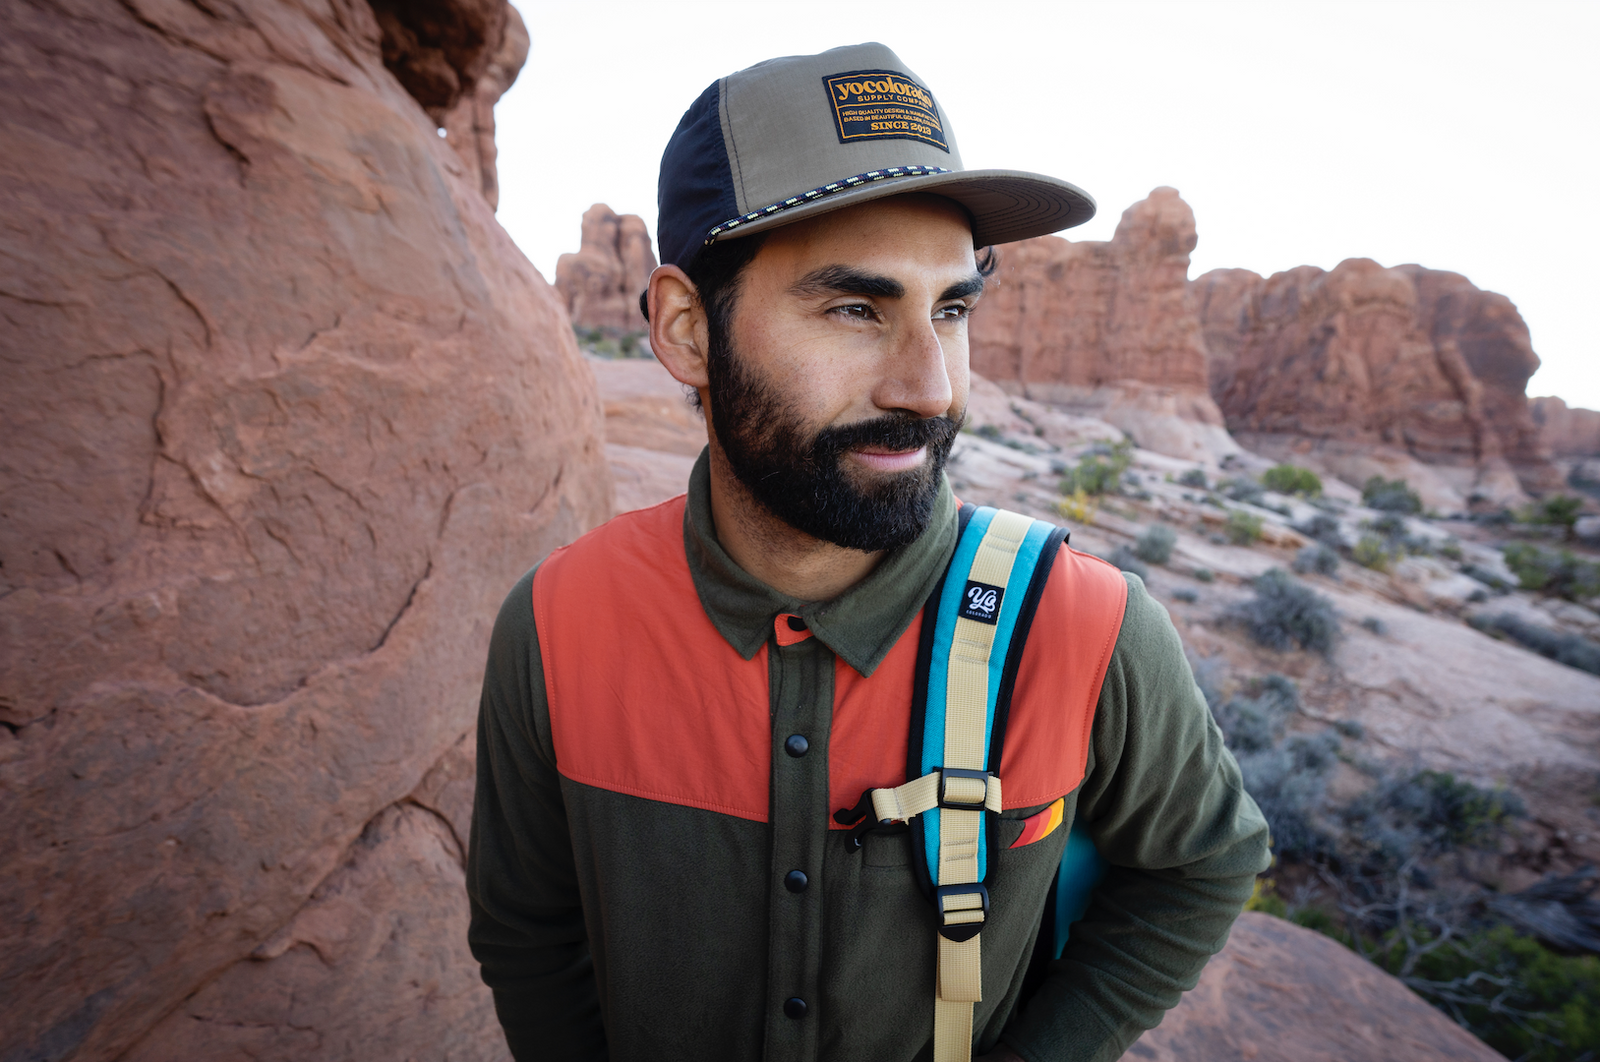 From Trucker Hats For Men to The Classic Beanie: Top Colorado Hats